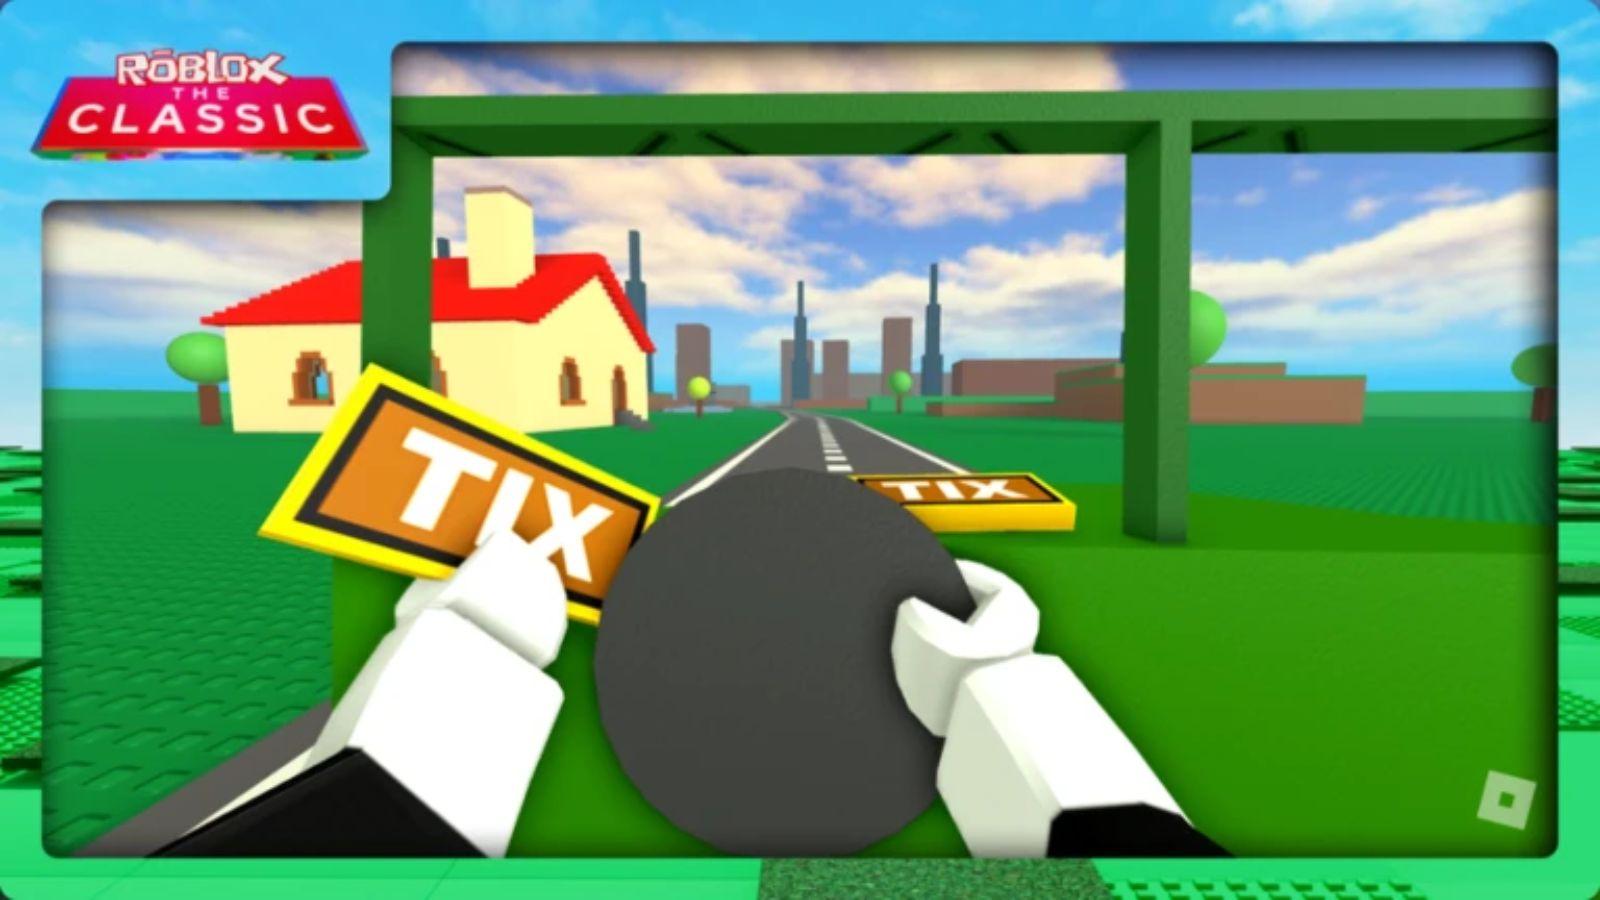 All Dusty Trip Tix locations in Roblox Classic event